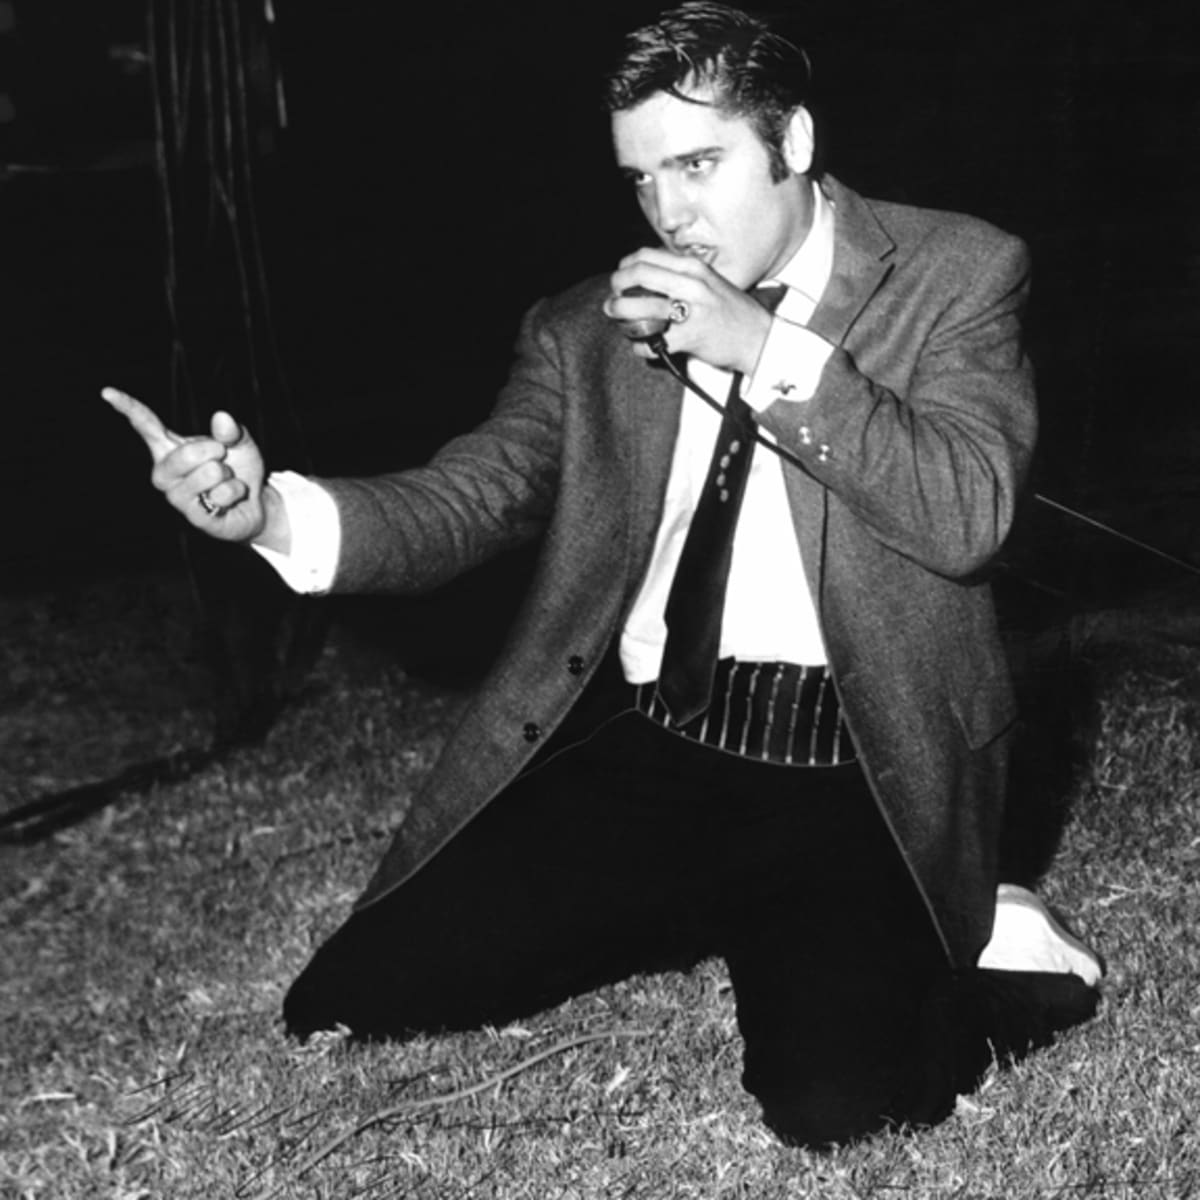 Go back to 1956, the year it all changed for Elvis Presley ...